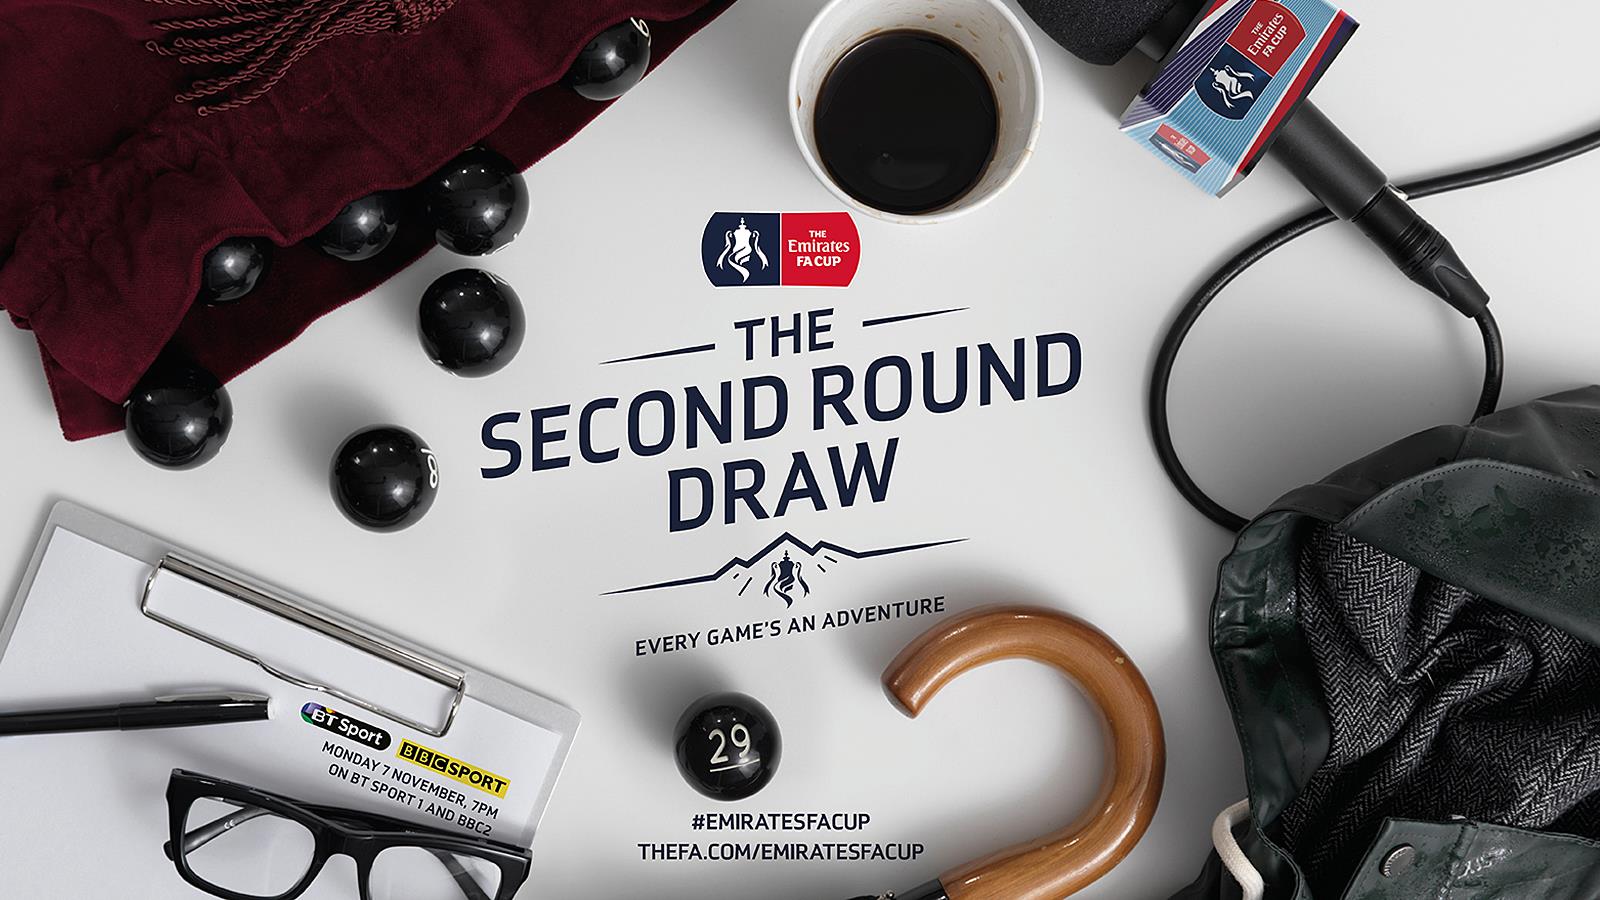 Emirates FA Cup Second Round Draw Takes Place Tonight! - News - Swindon Town